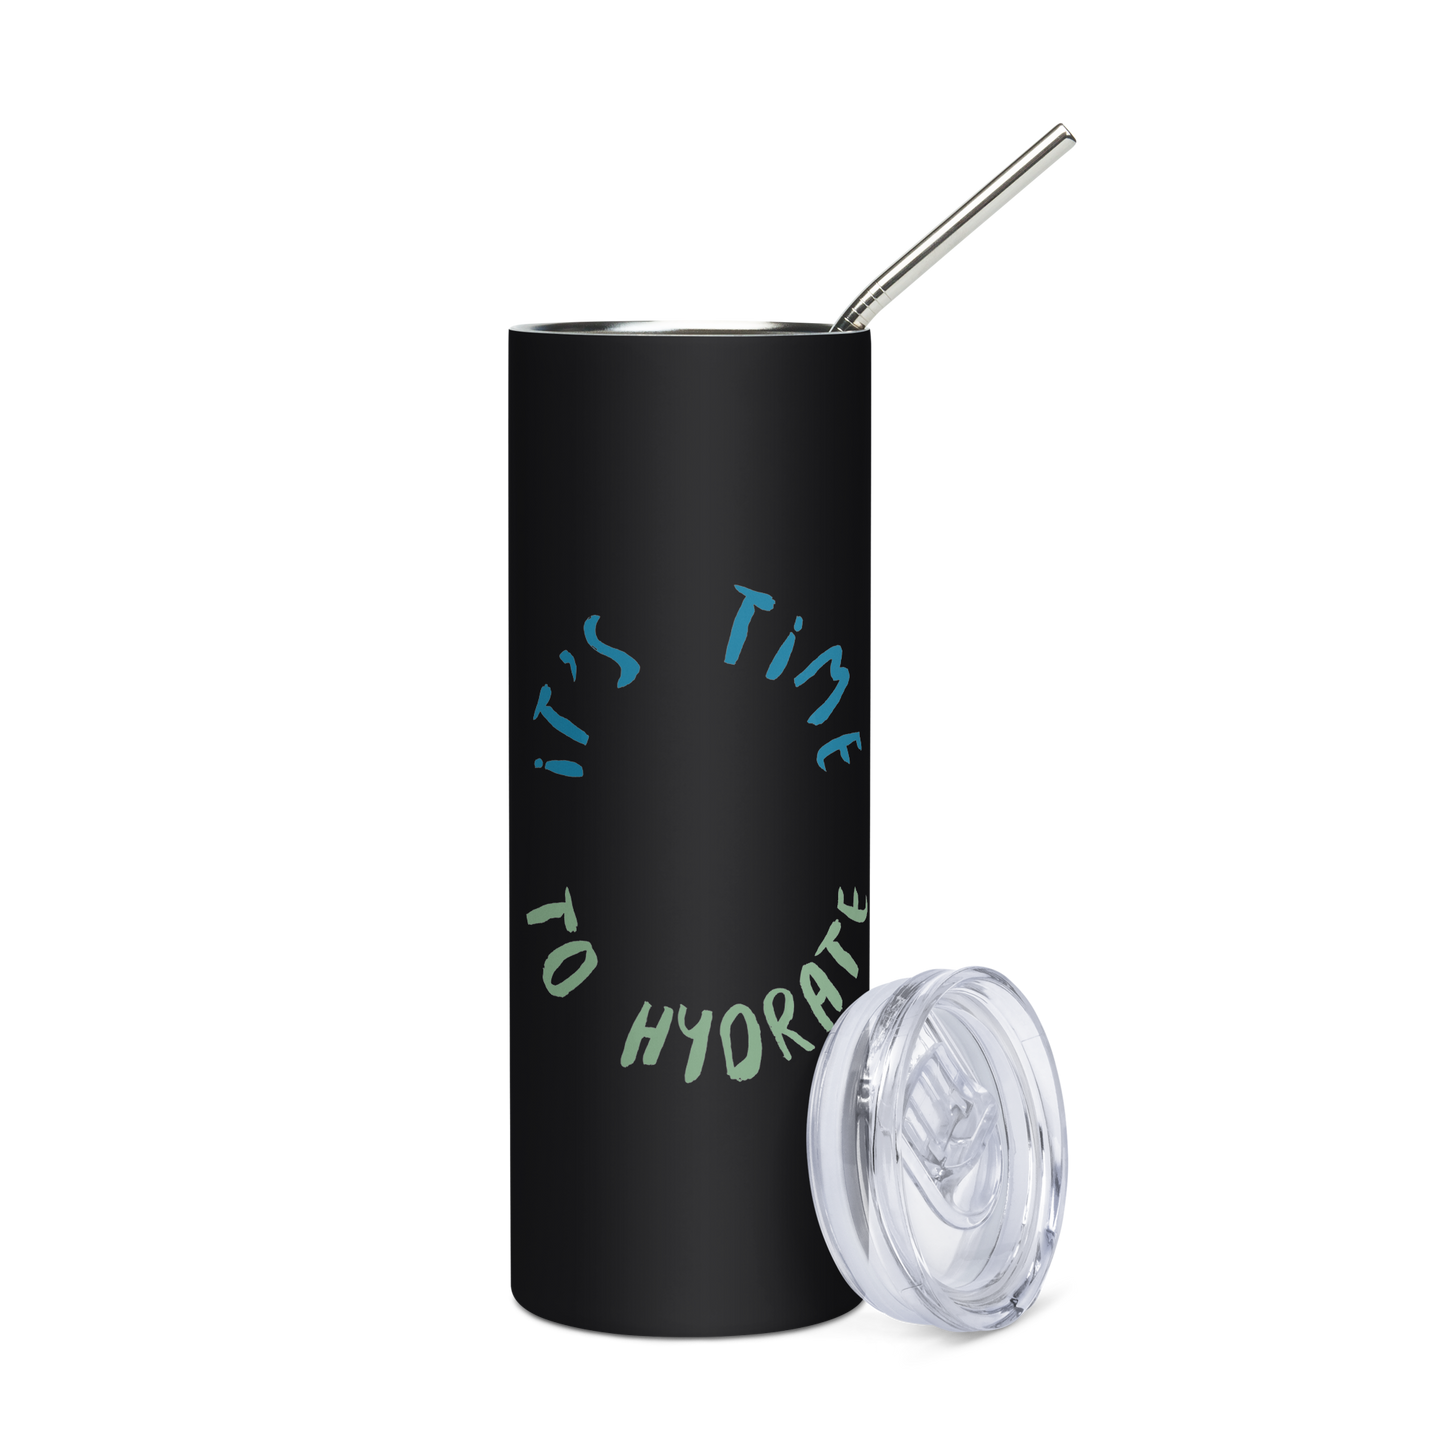 Stainless steel tumbler: It's time to hydrate